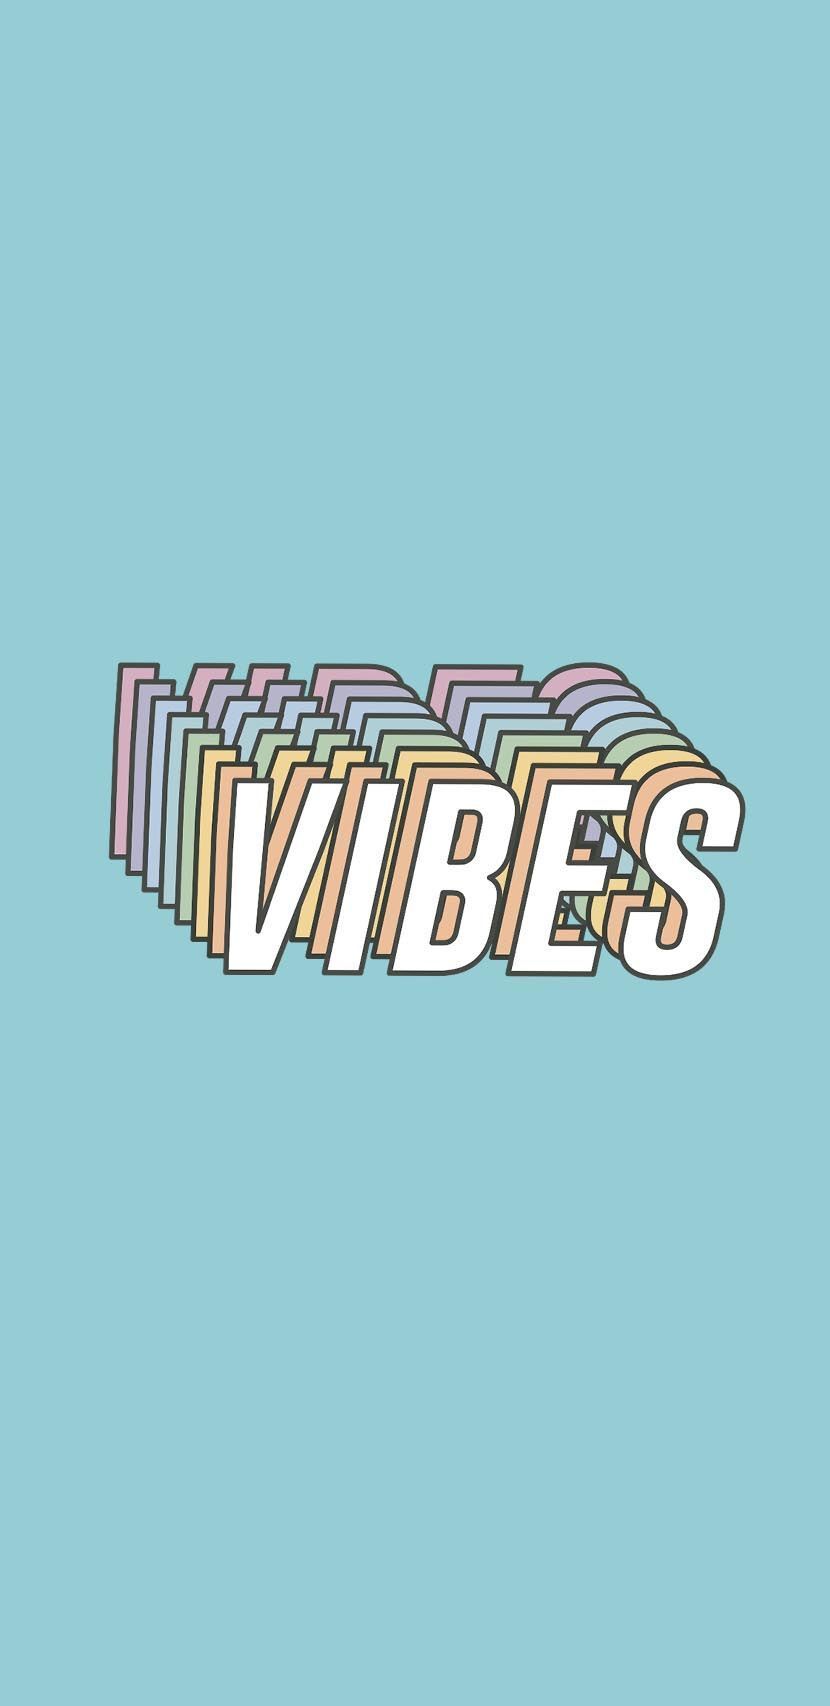 Free download Only good vibes on a lazy day vscowallpaper vibes beach vibes [830x1706] for your Desktop, Mobile & Tablet. Explore Lazy Day Wallpaper. Memorial Day Wallpaper, Thanksgiving Day